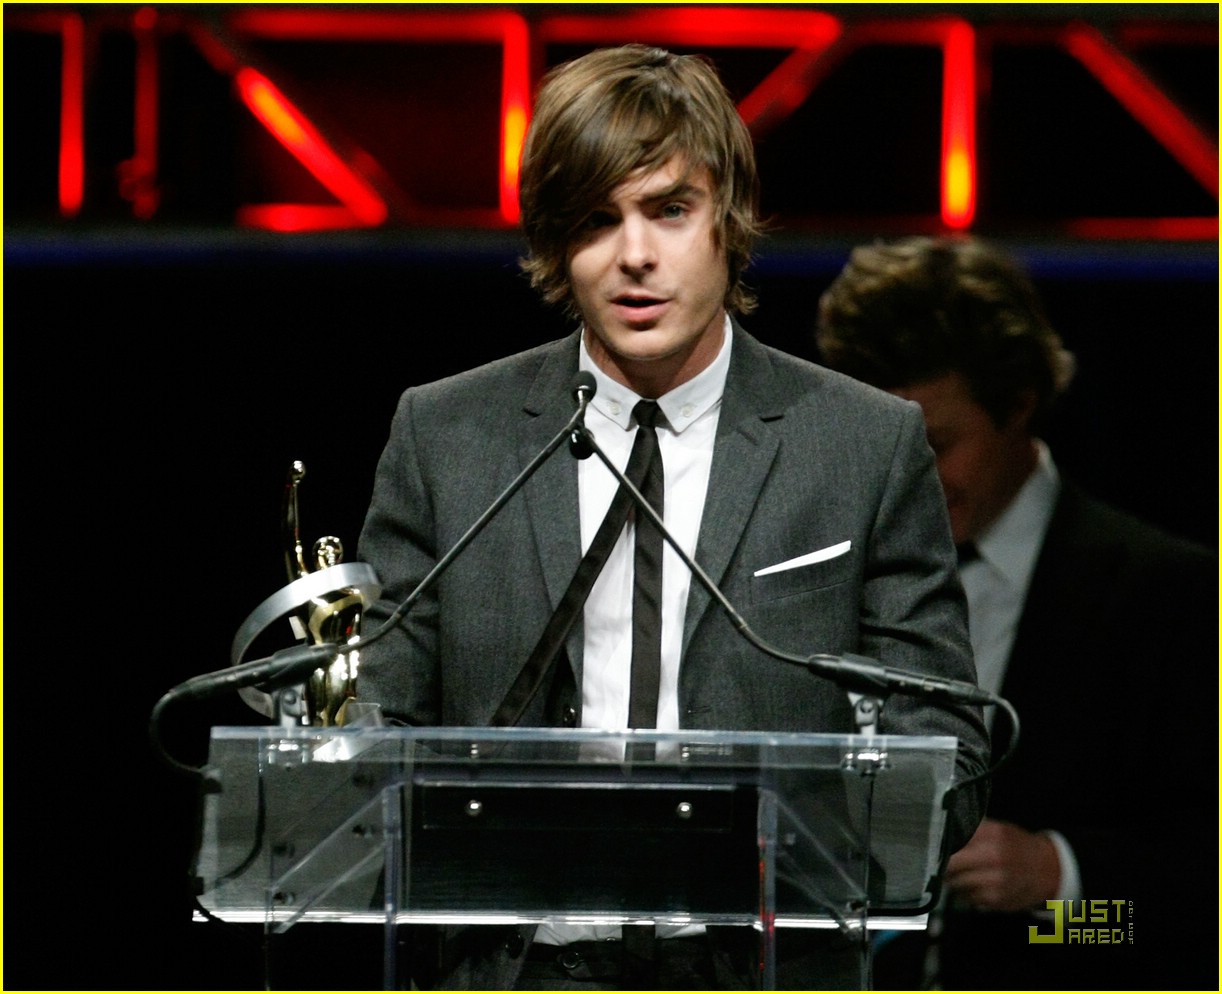 zac efron showest honors 17